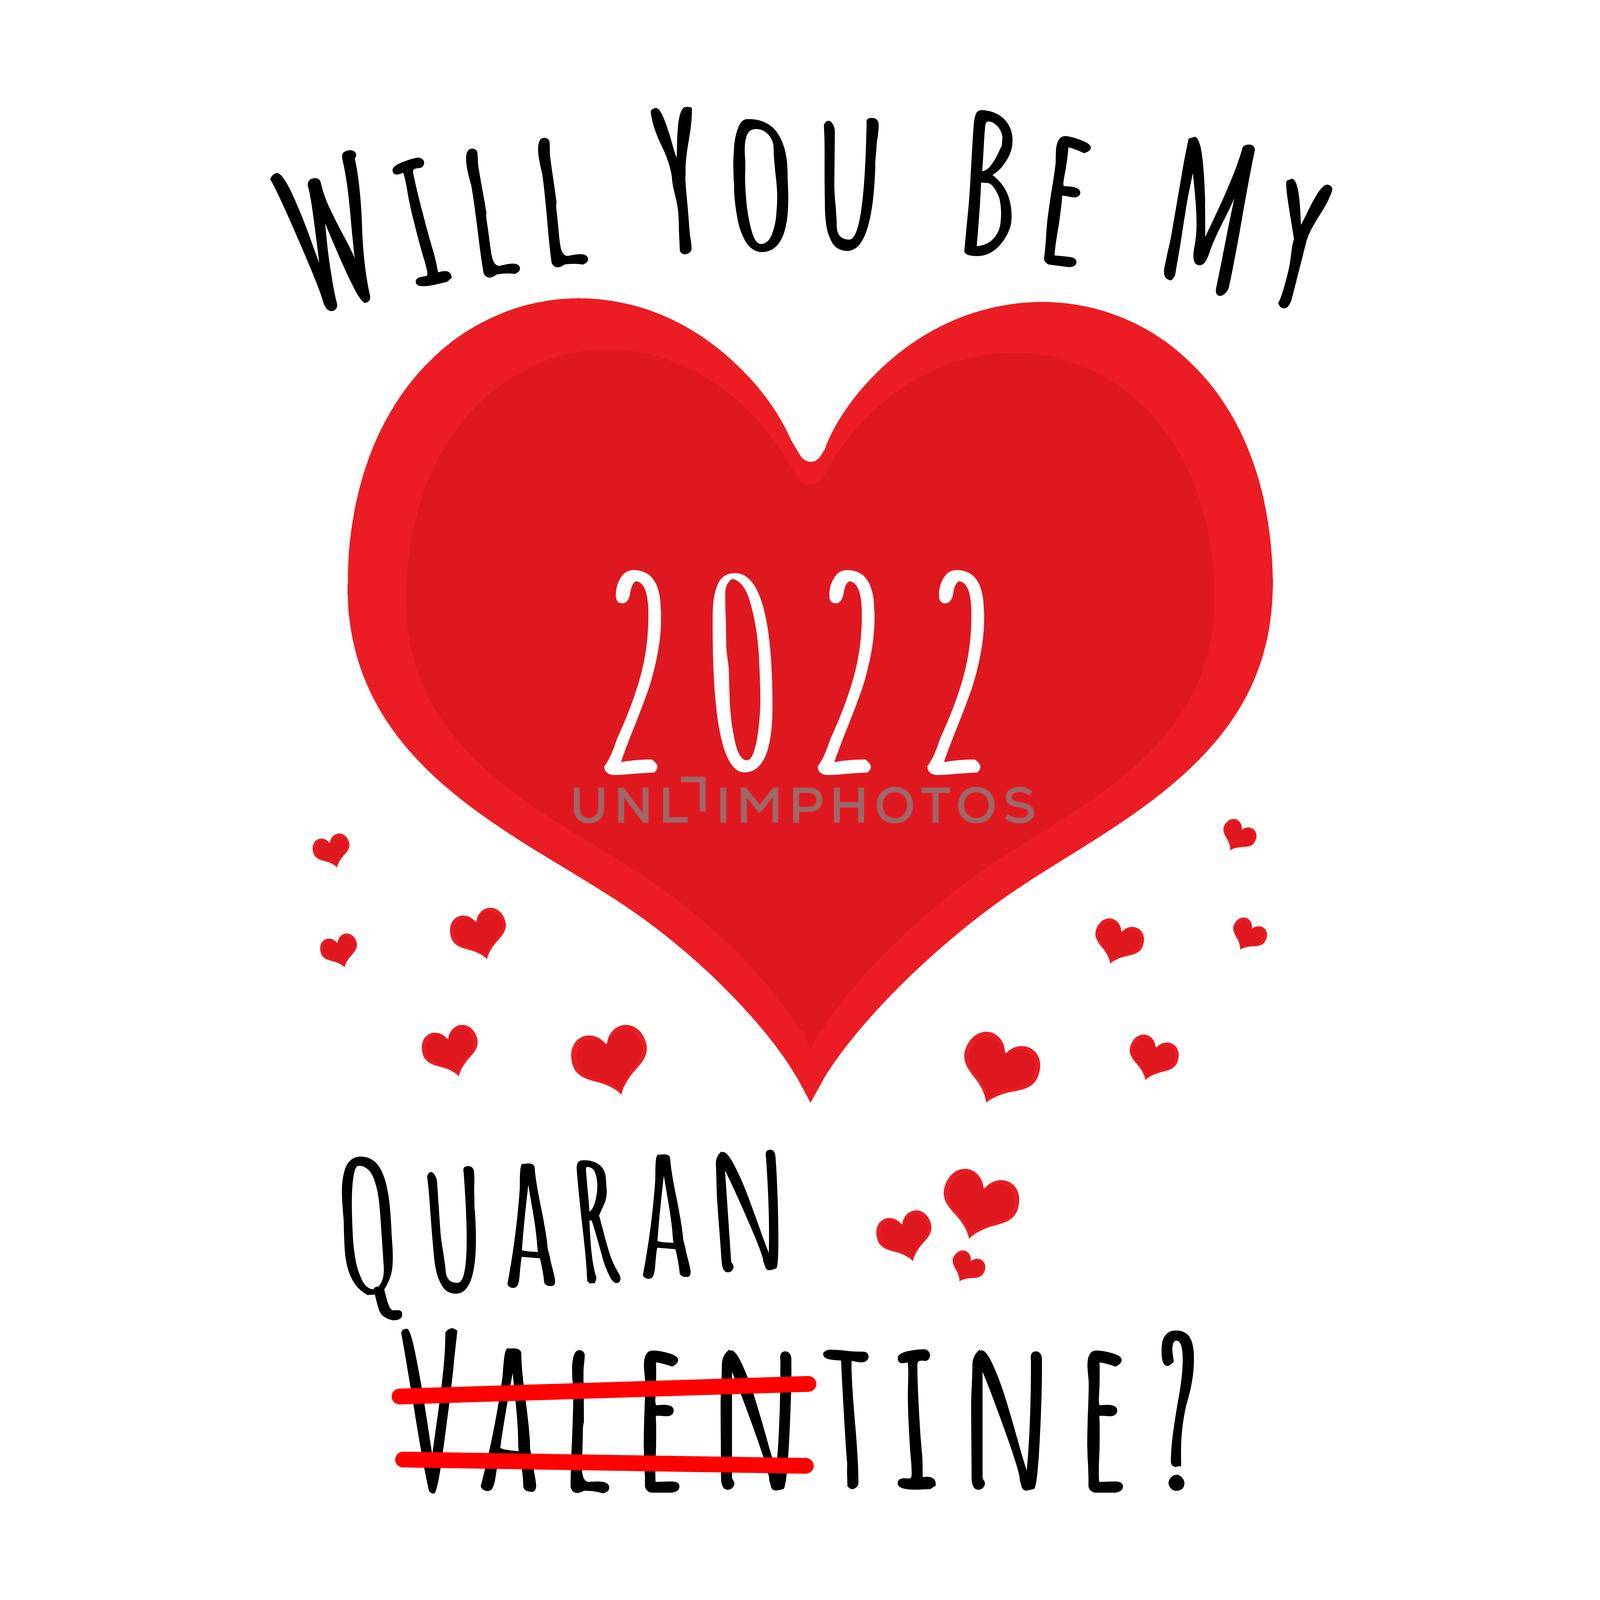 A colection of love hearts with the text "Will you be my 2022 Quarantine" and Valentines crossed out.